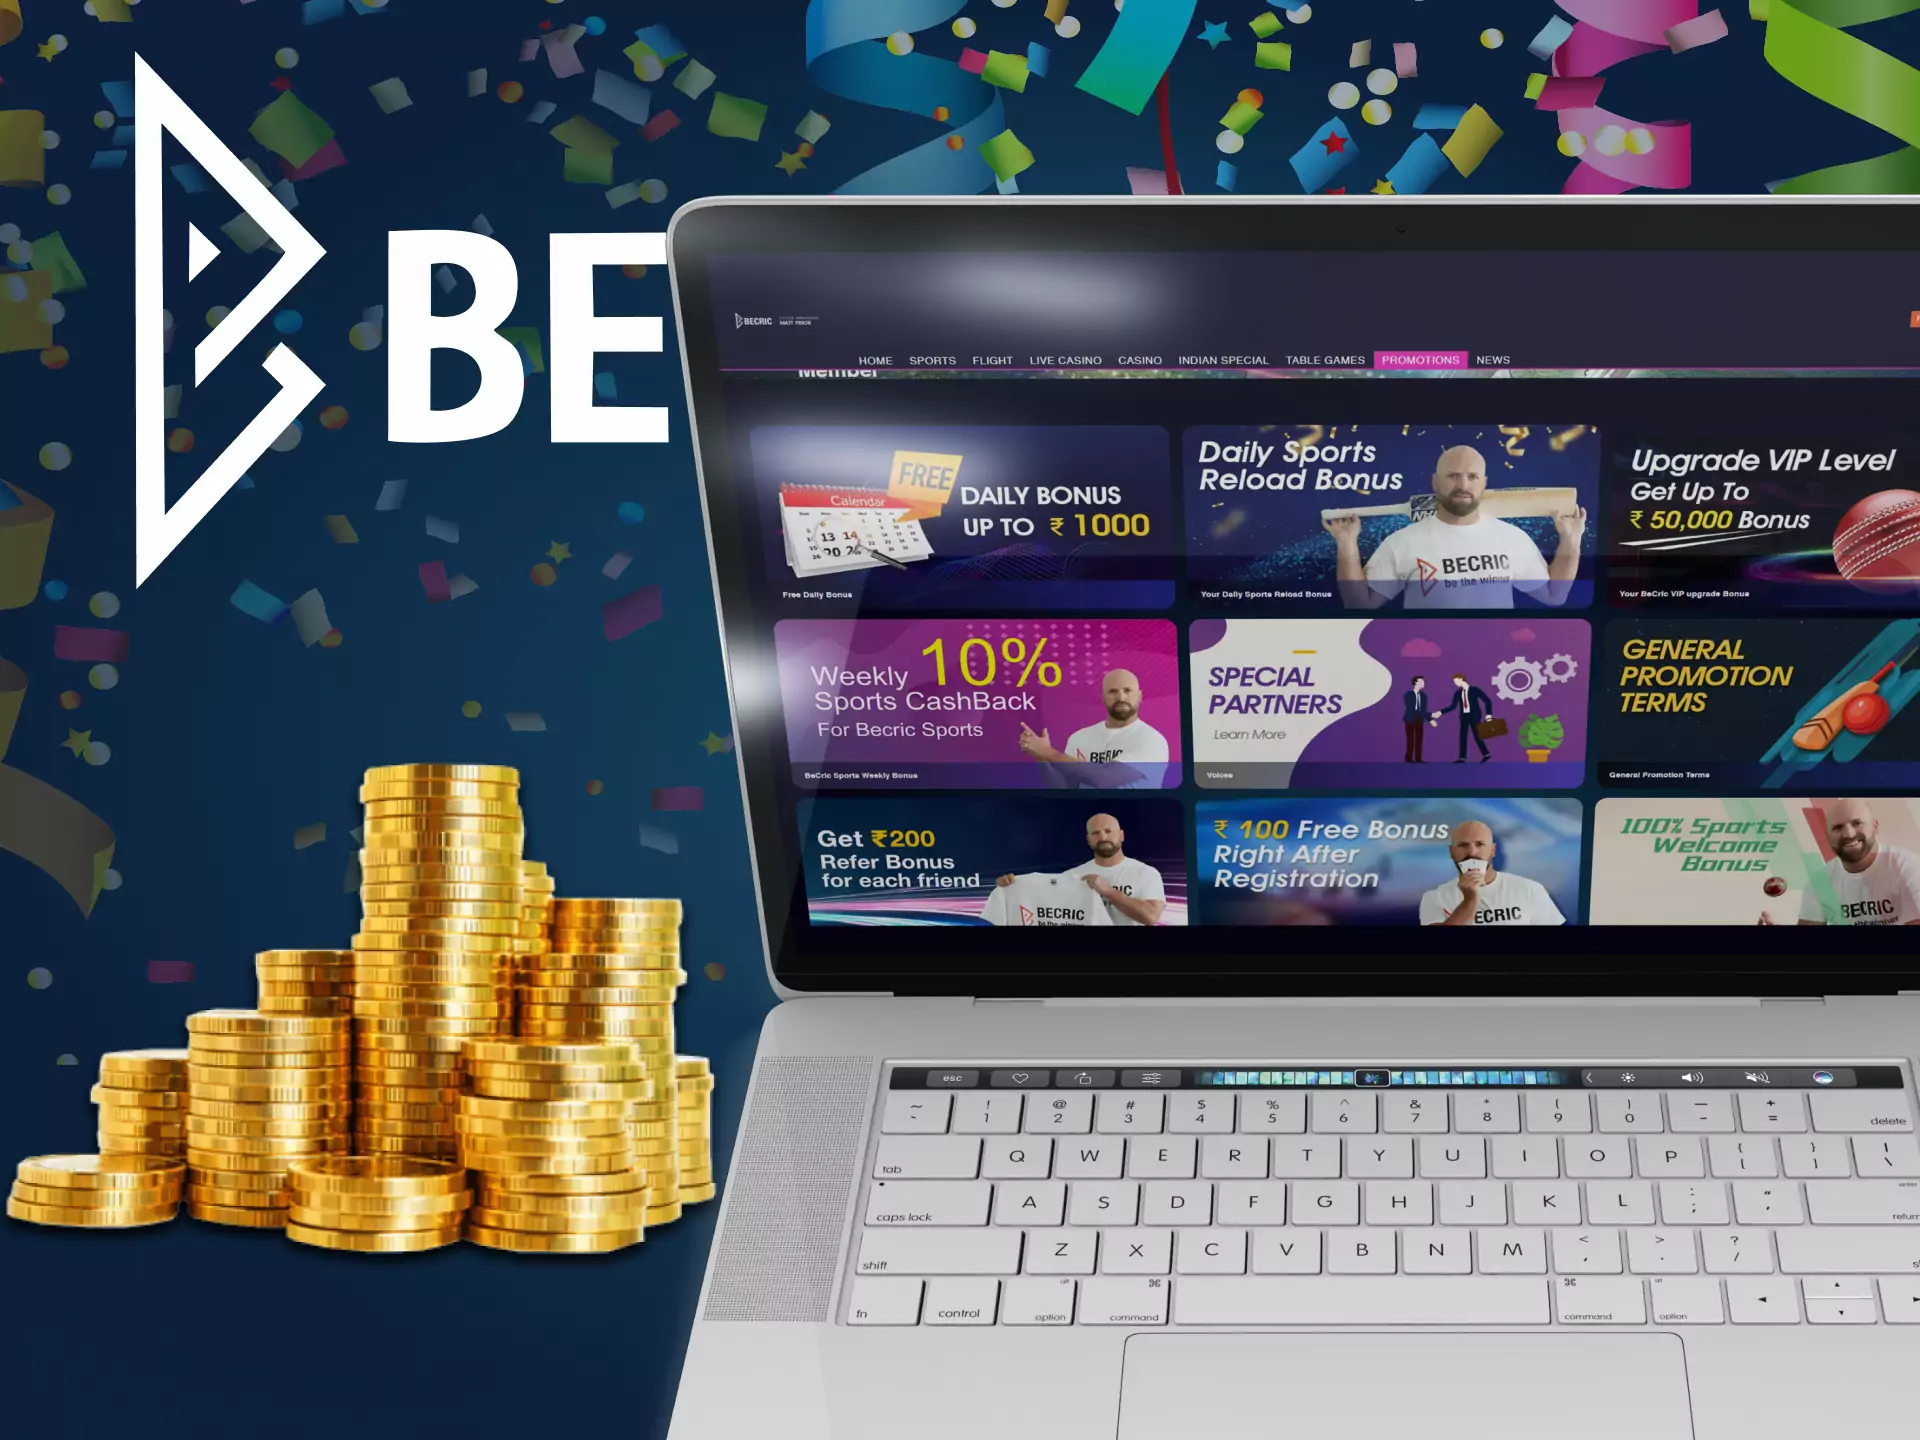 Use promo codes to increase your profit from betting on Becric.